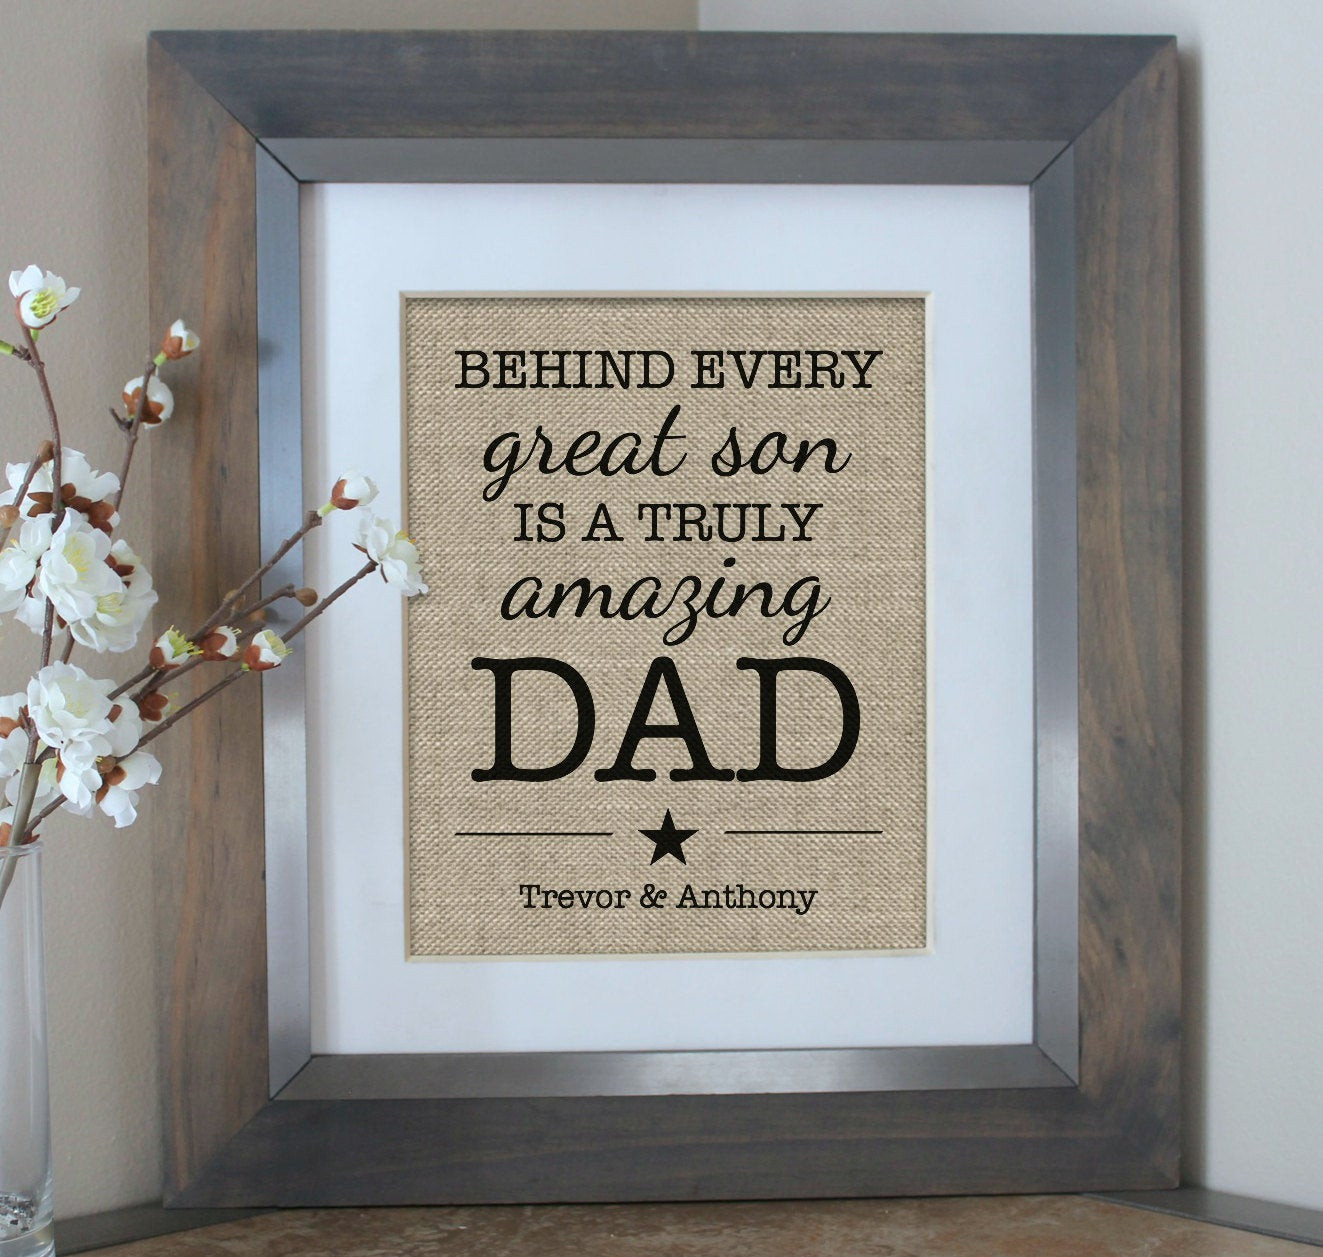 Personalized Fathers Day Gift
 Father s Day Gift from Son Personalized Gift by EmmaAndTheBean